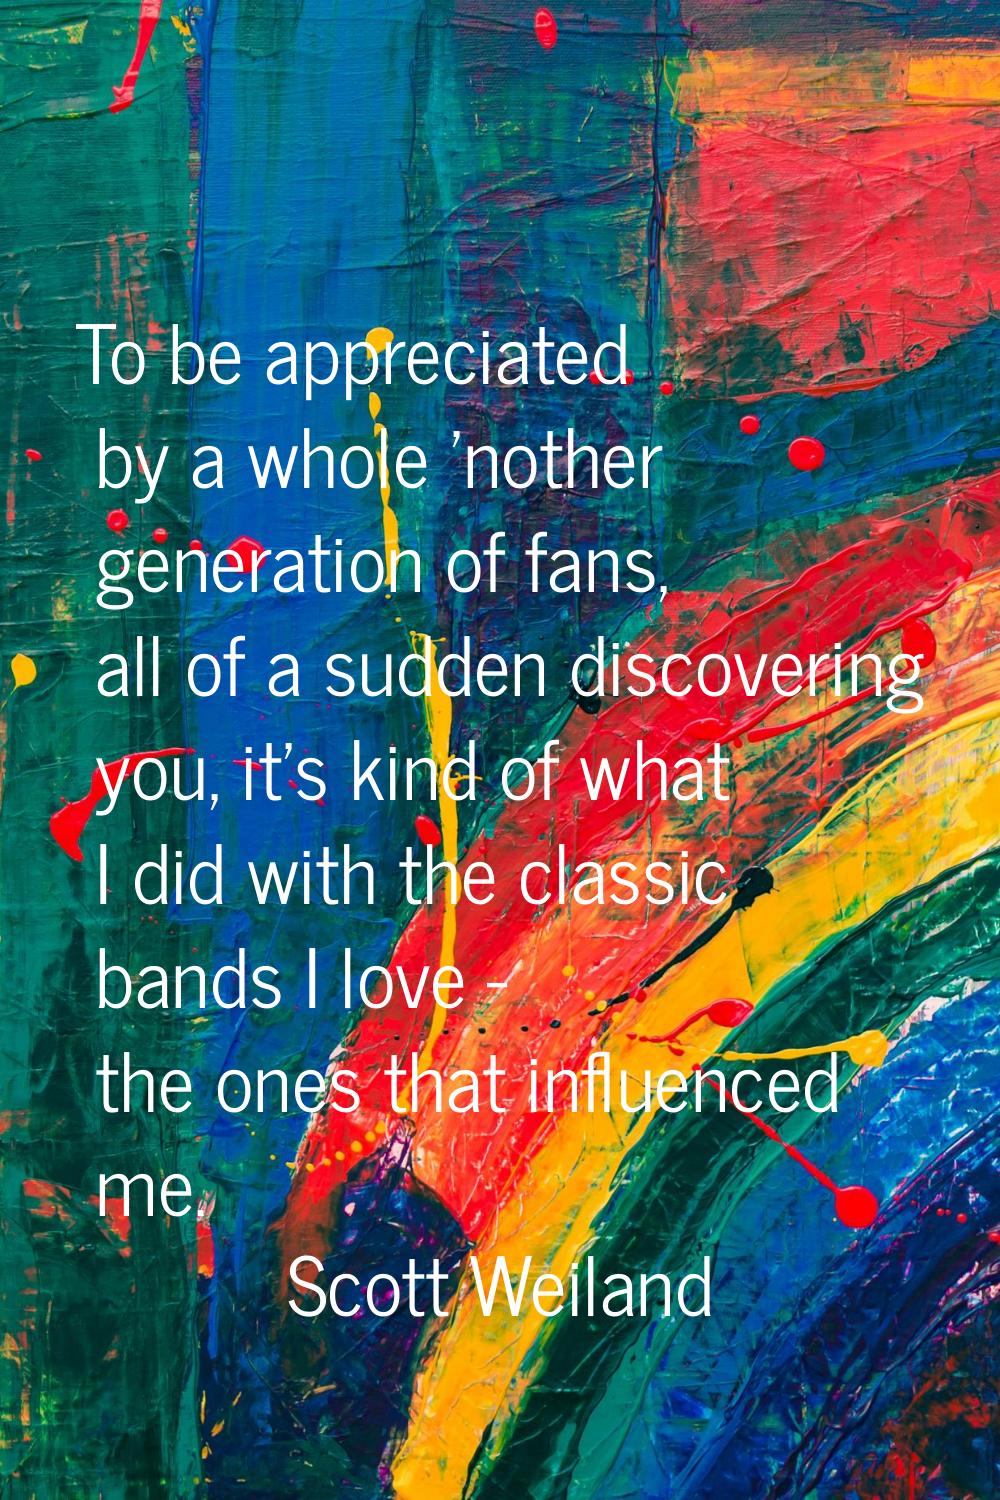 To be appreciated by a whole 'nother generation of fans, all of a sudden discovering you, it's kind